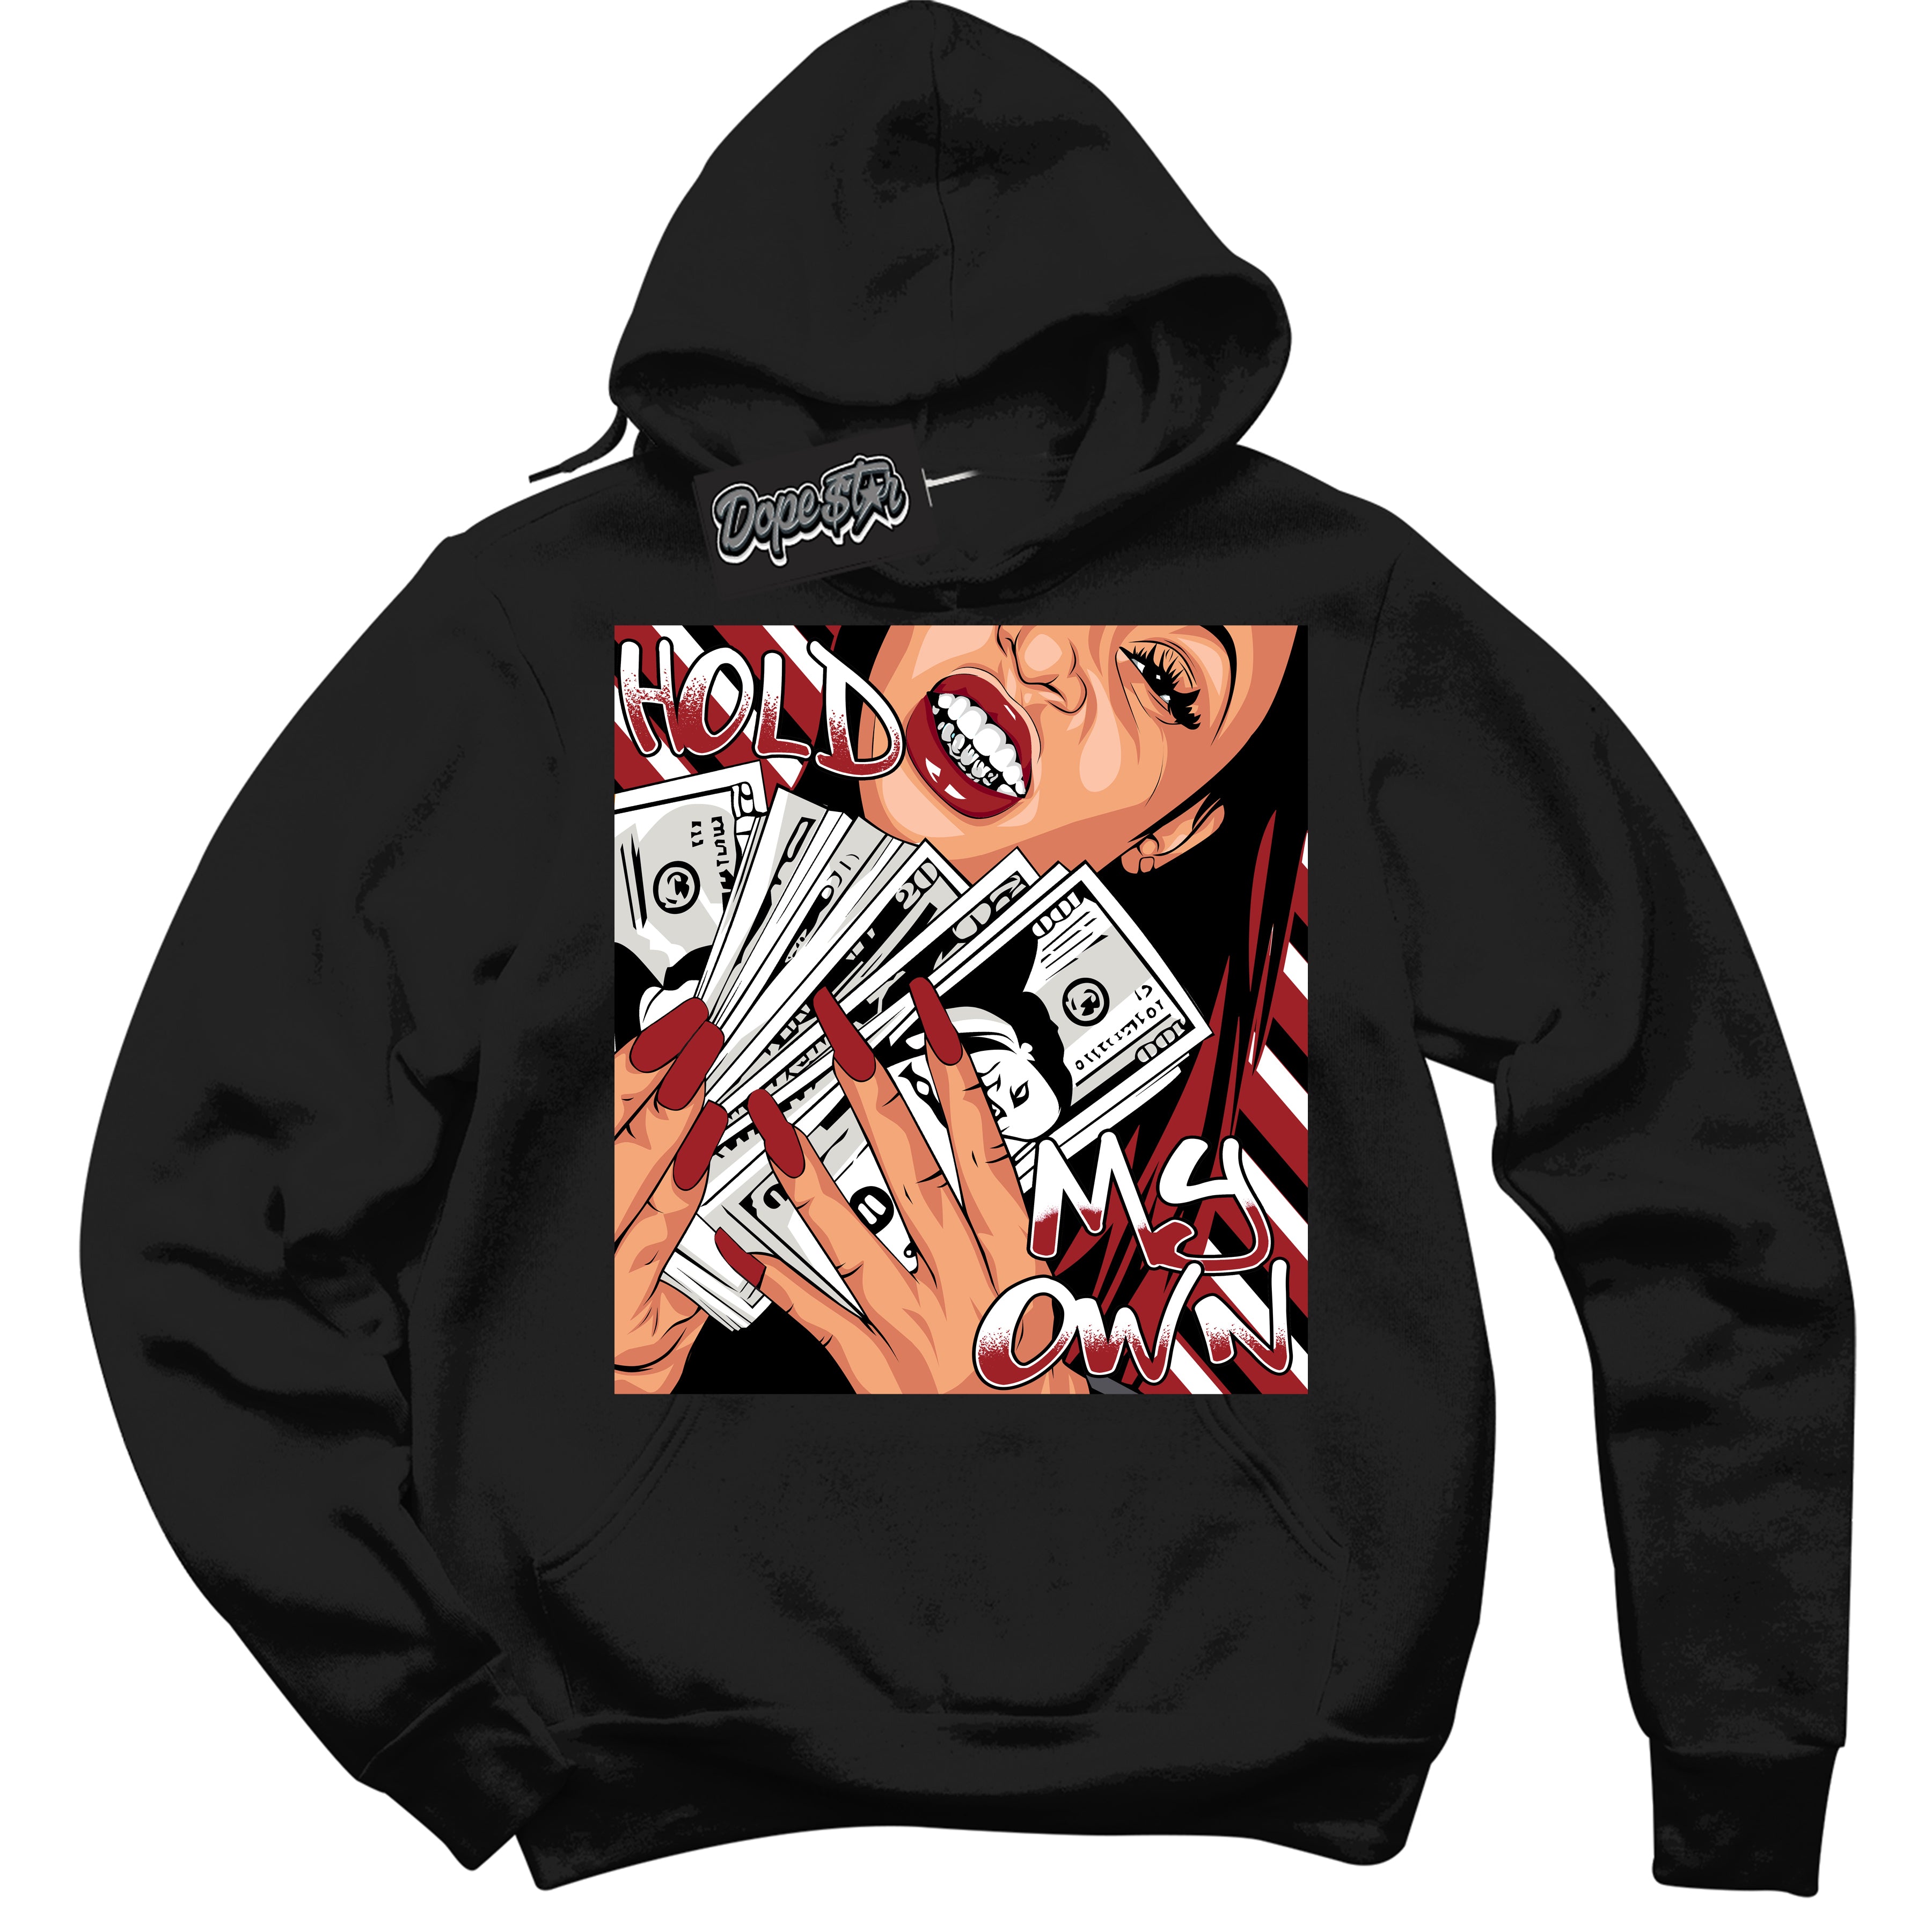 Cool Black Hoodie With “ Hold My Own “ Design That Perfectly Matches Lost And Found 1s Sneakers